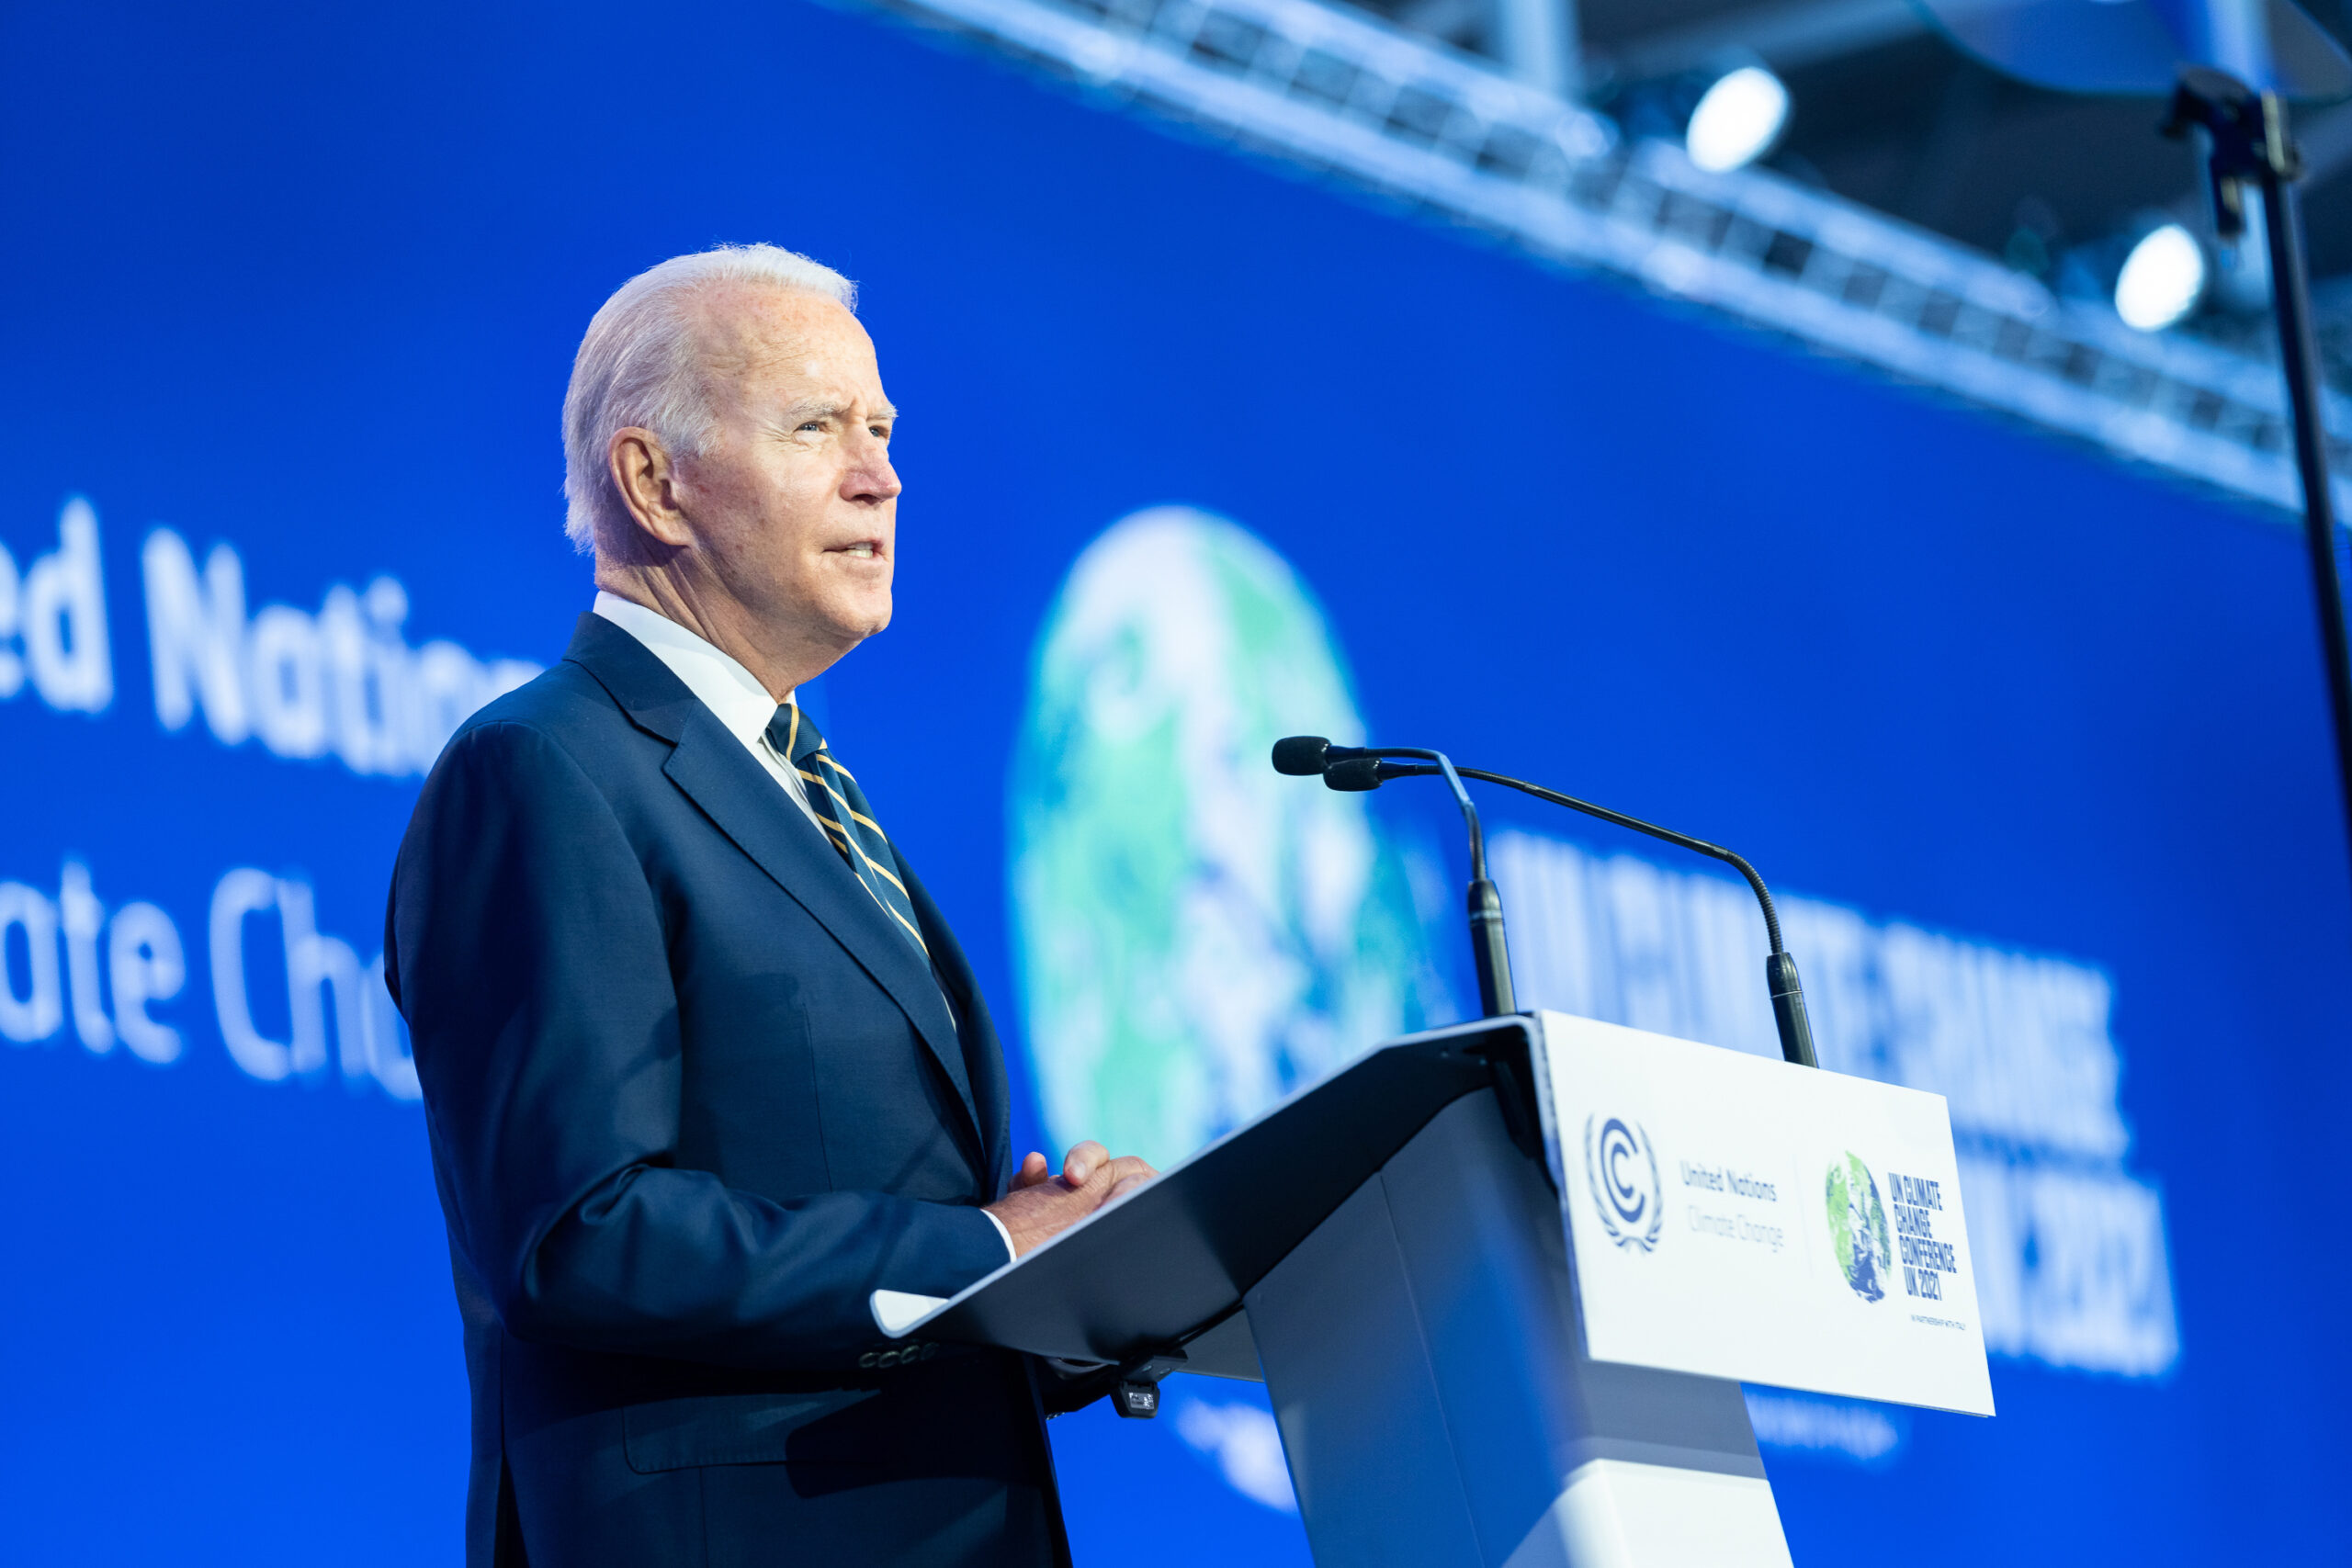 Biden at risk of breaking climate promise with $500 million of public finance for LNG imports in Poland